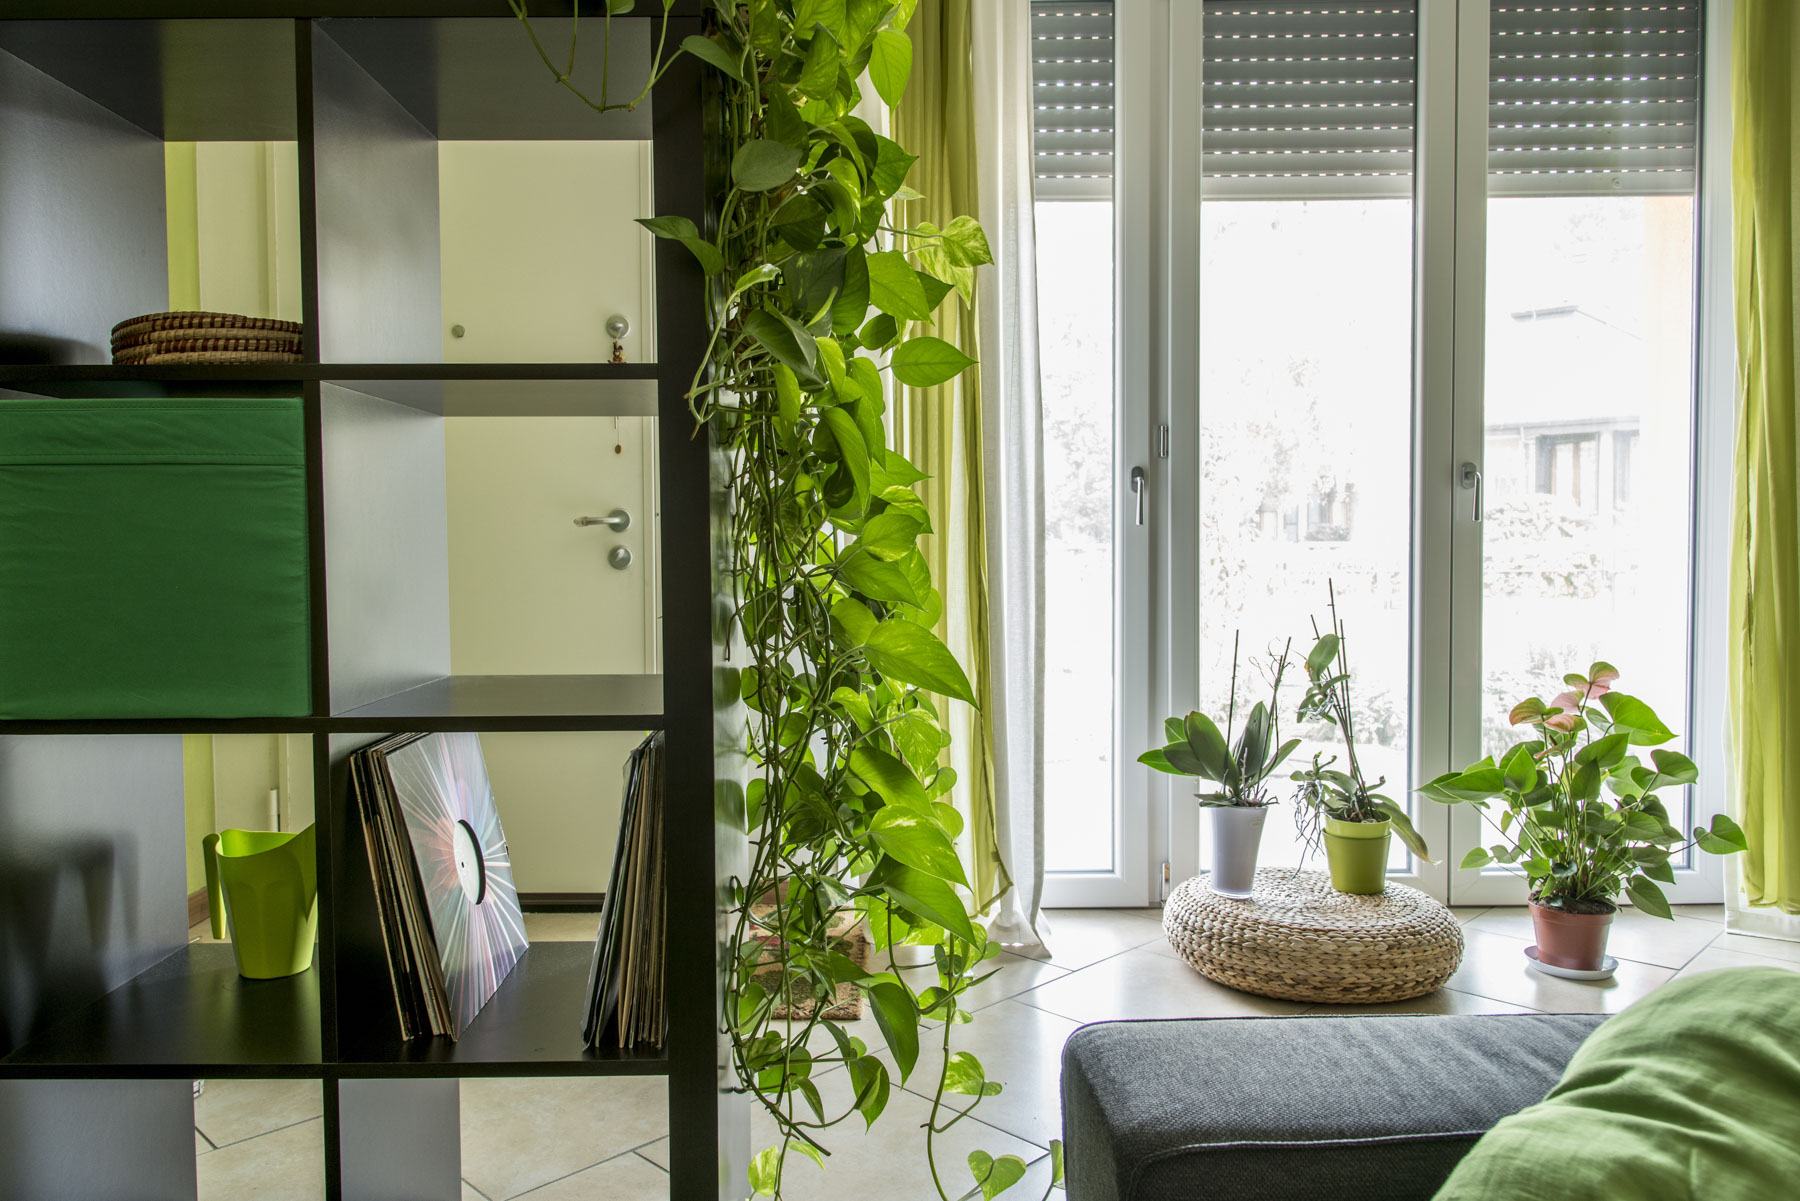 Leafy greenery on indoor plants can have great health benefits.